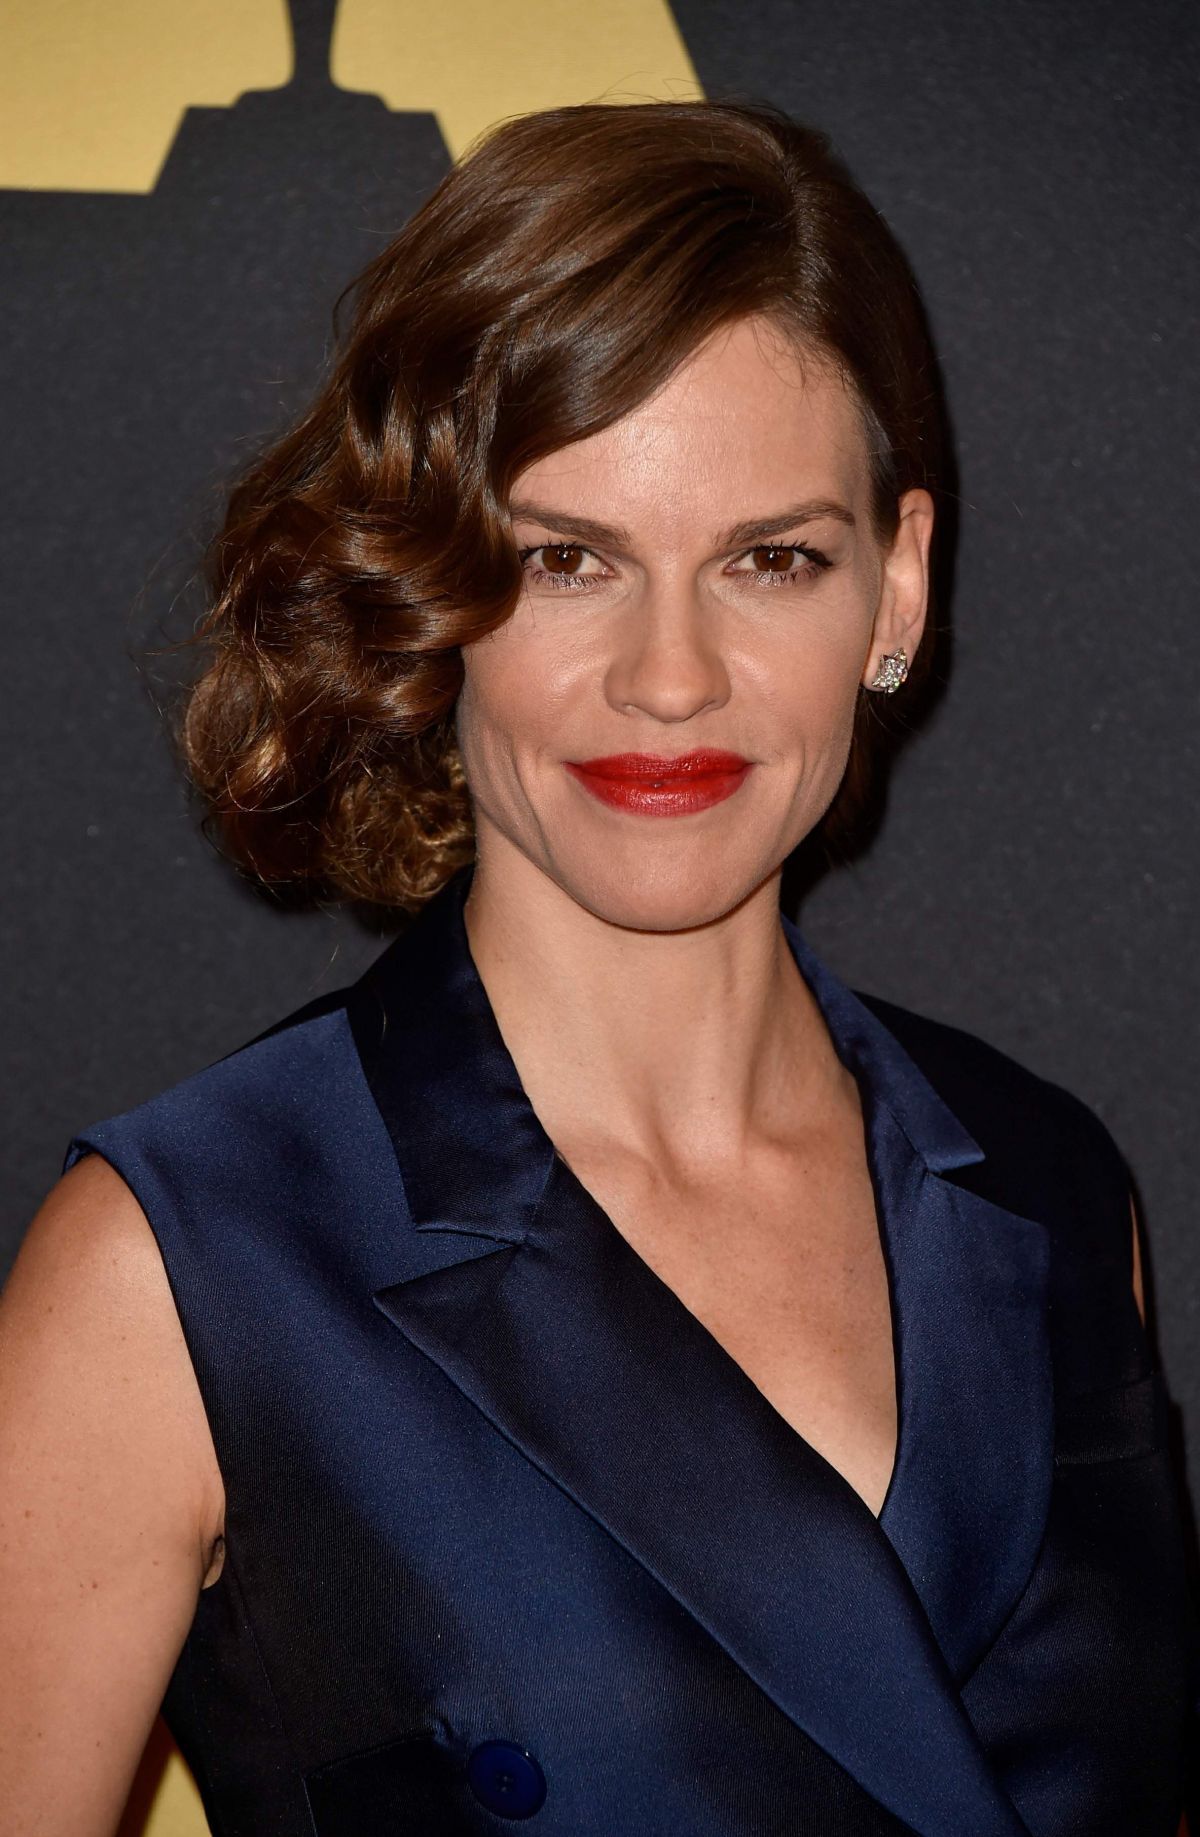 hilary-swank-at-ampas-2014-governor-s-awards-in-hollywood_5.